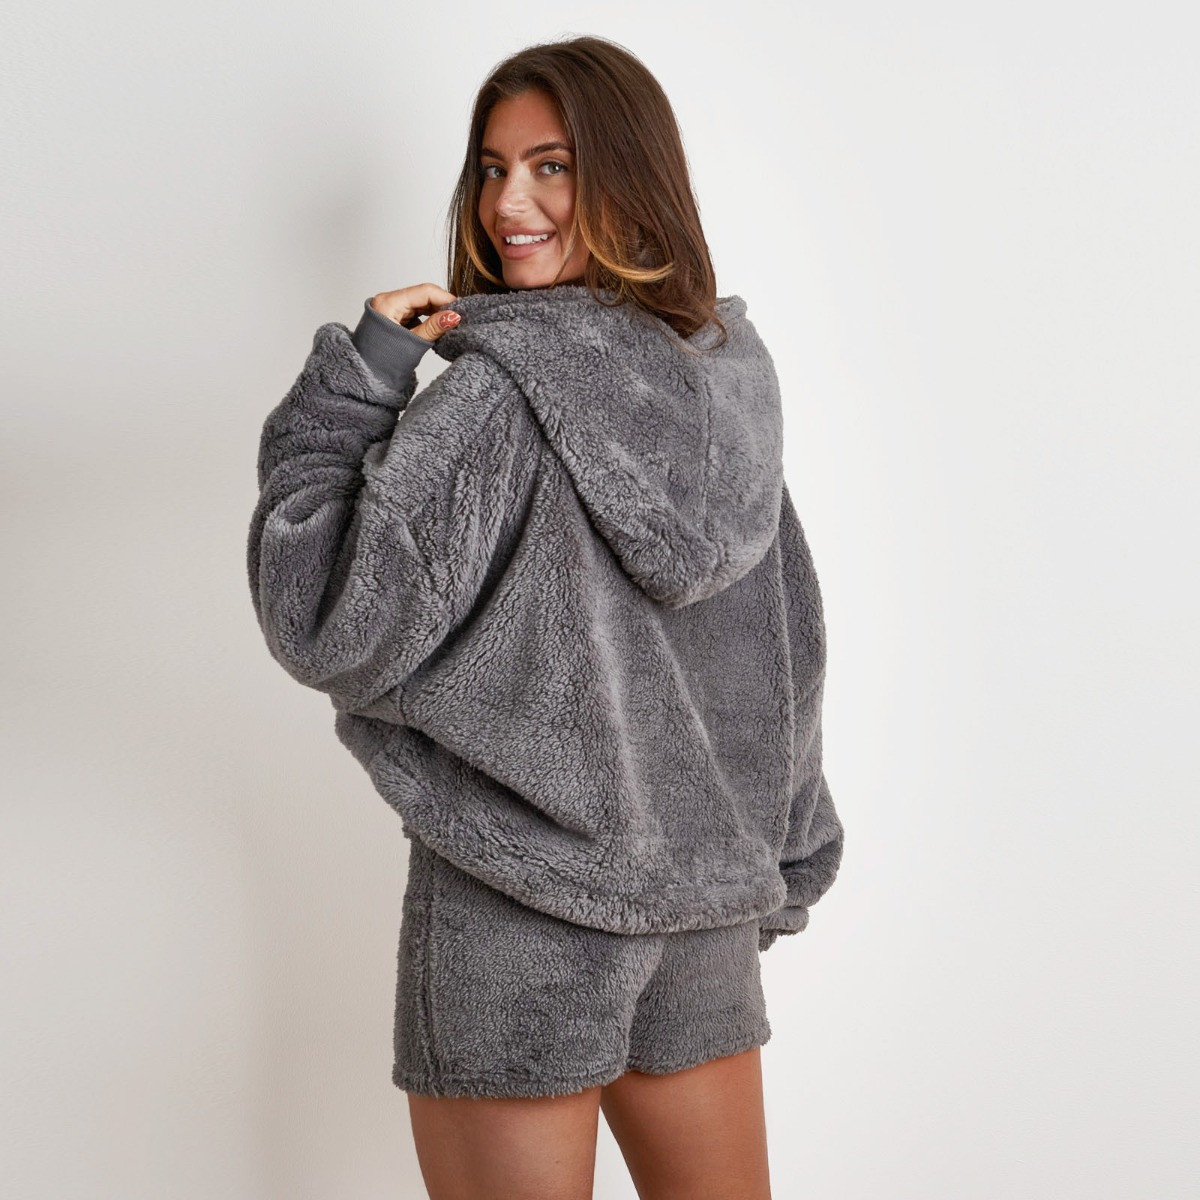 Brentfords Cropped Teddy Fleece Hoodie, One Size - Charcoal>